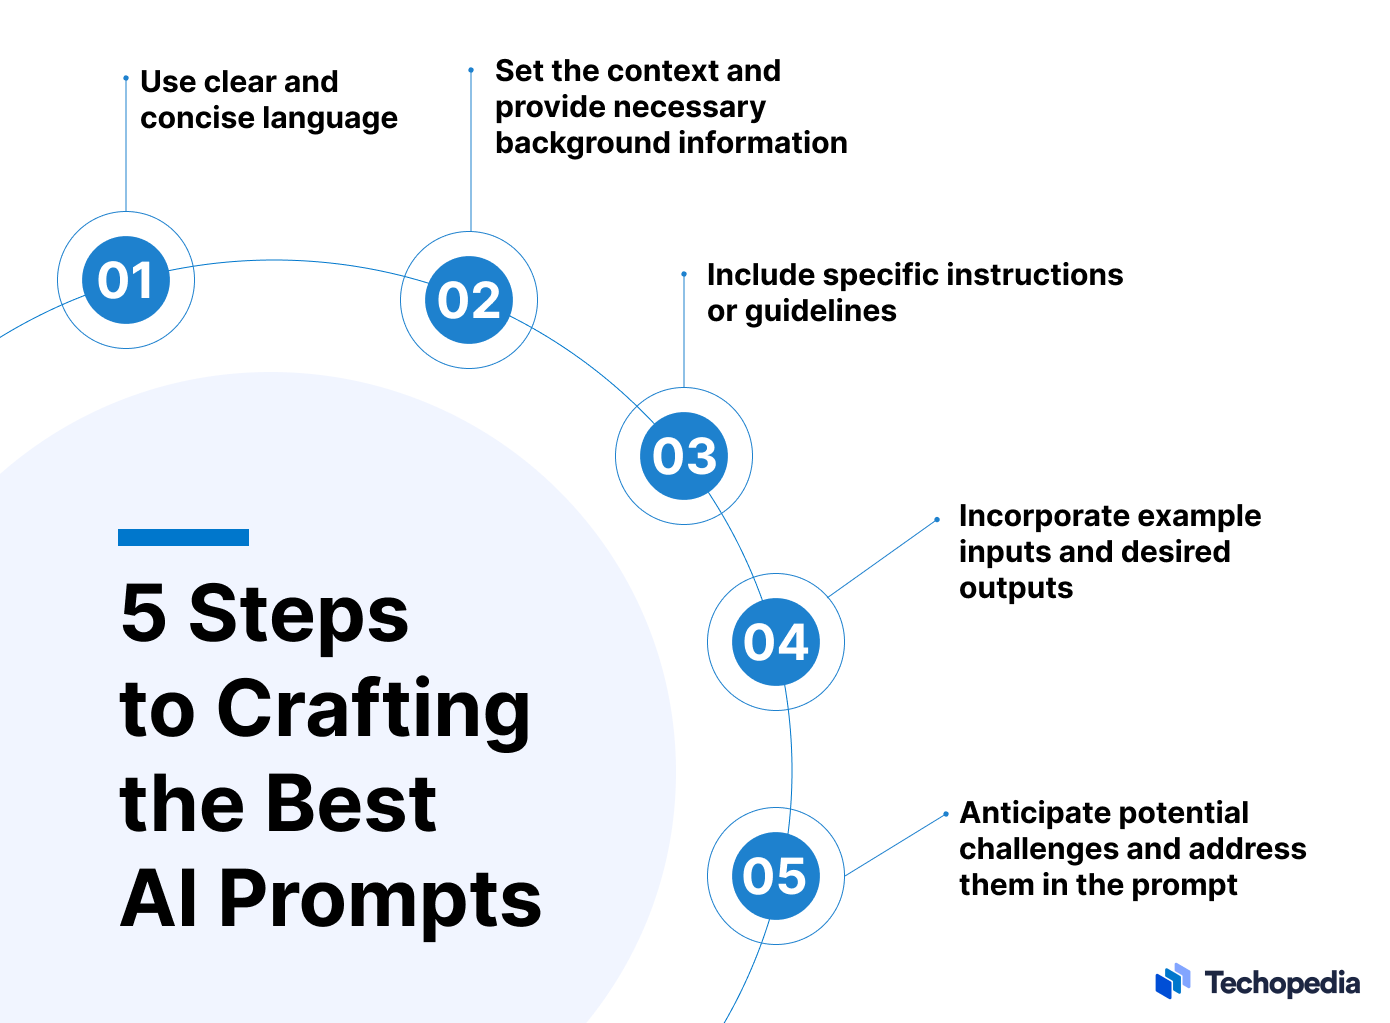 5 Steps to Crafting the Best AI Prompts